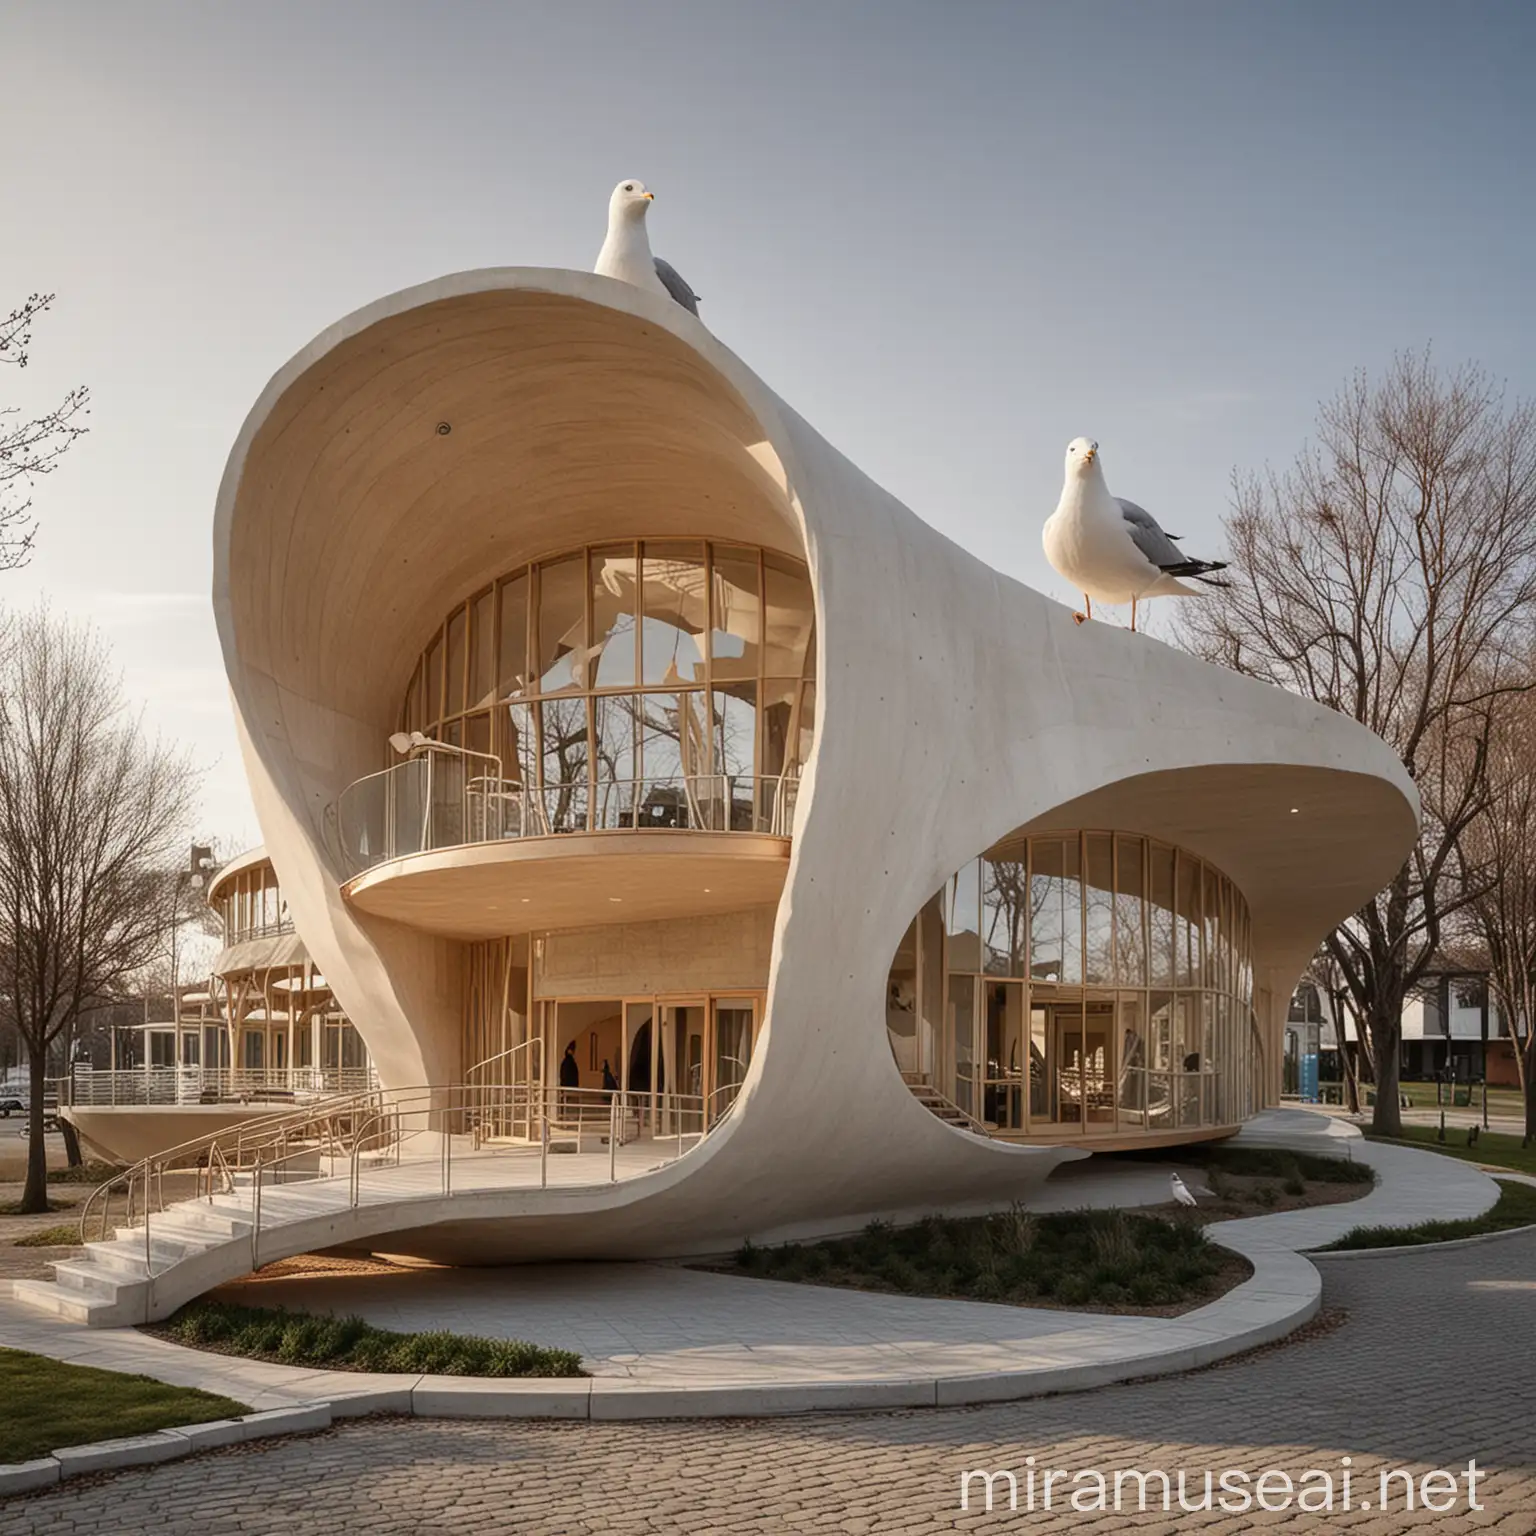 I WANT TO DESIGN MONTESSORI SCHOOL AND I TAKE INSPIRATION FROM SEAGULL BIRD AND FROM TWO WINGS AND A TAIL AND I WANT ITS ALL FORM IN CURVES BUILDING AS ARCHITECTURAL POINT OF VIEW EXTERIOR